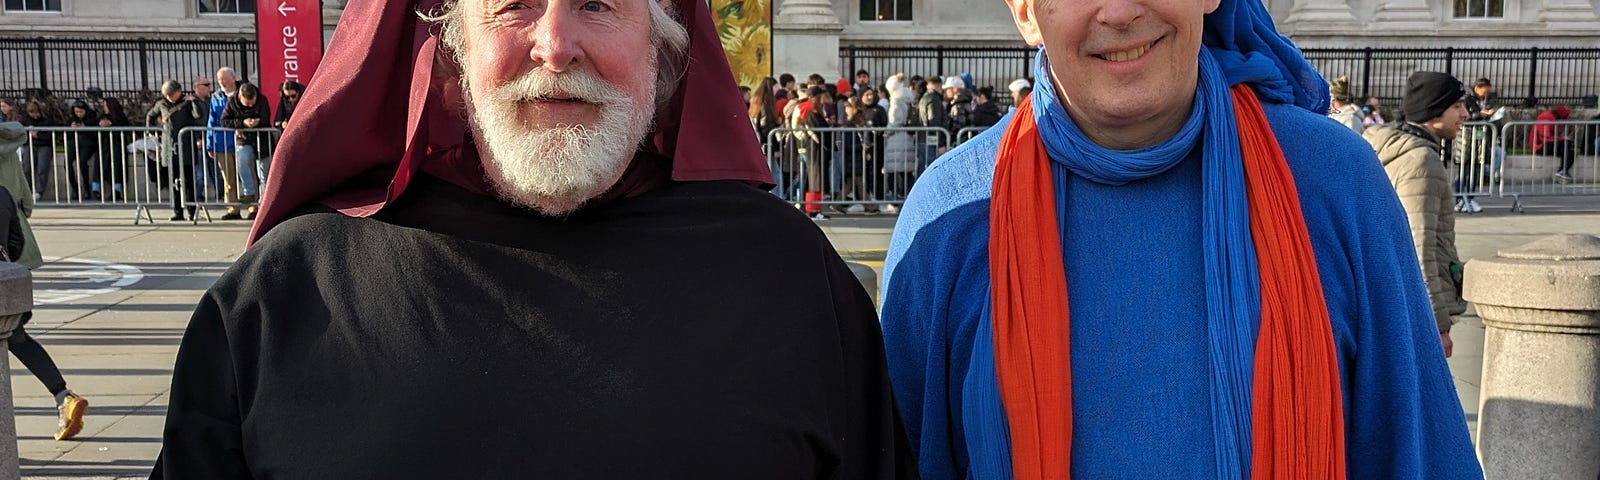 Two men, one dressed in black with burgundy headdress the other in blue and red.